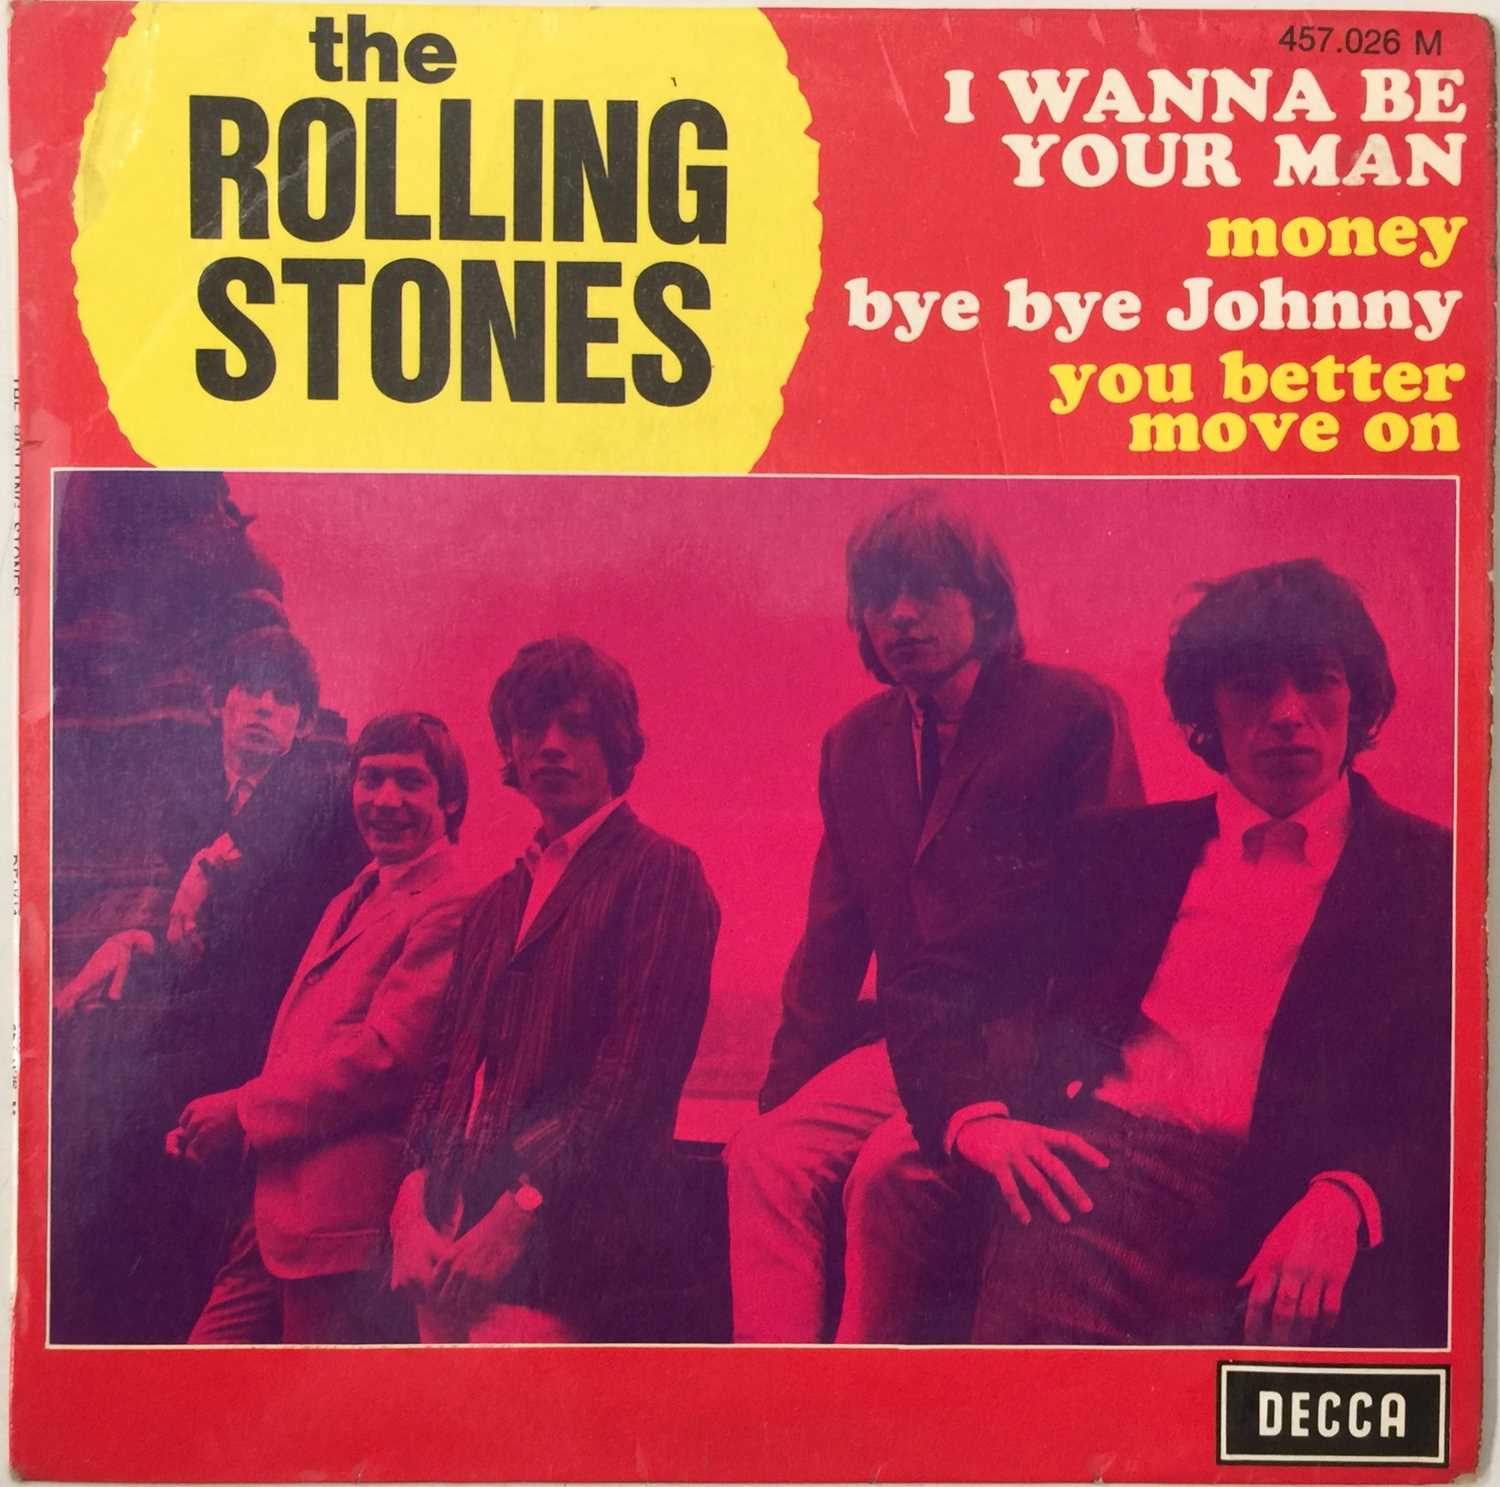 THE ROLLING STONES - I WANNA BE YOUR MAN 7" (457.026 M) - Image 2 of 5